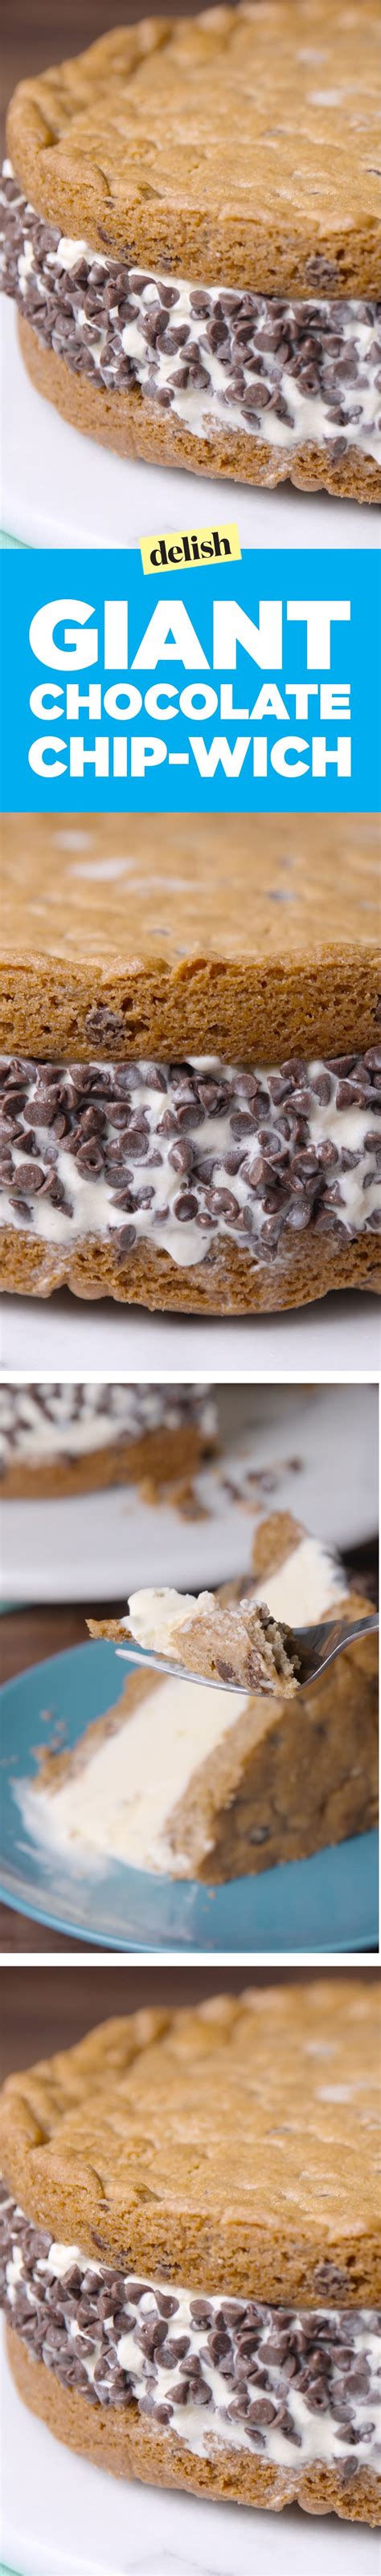 How To Make A Giant Chipwich Ice Cream Cake